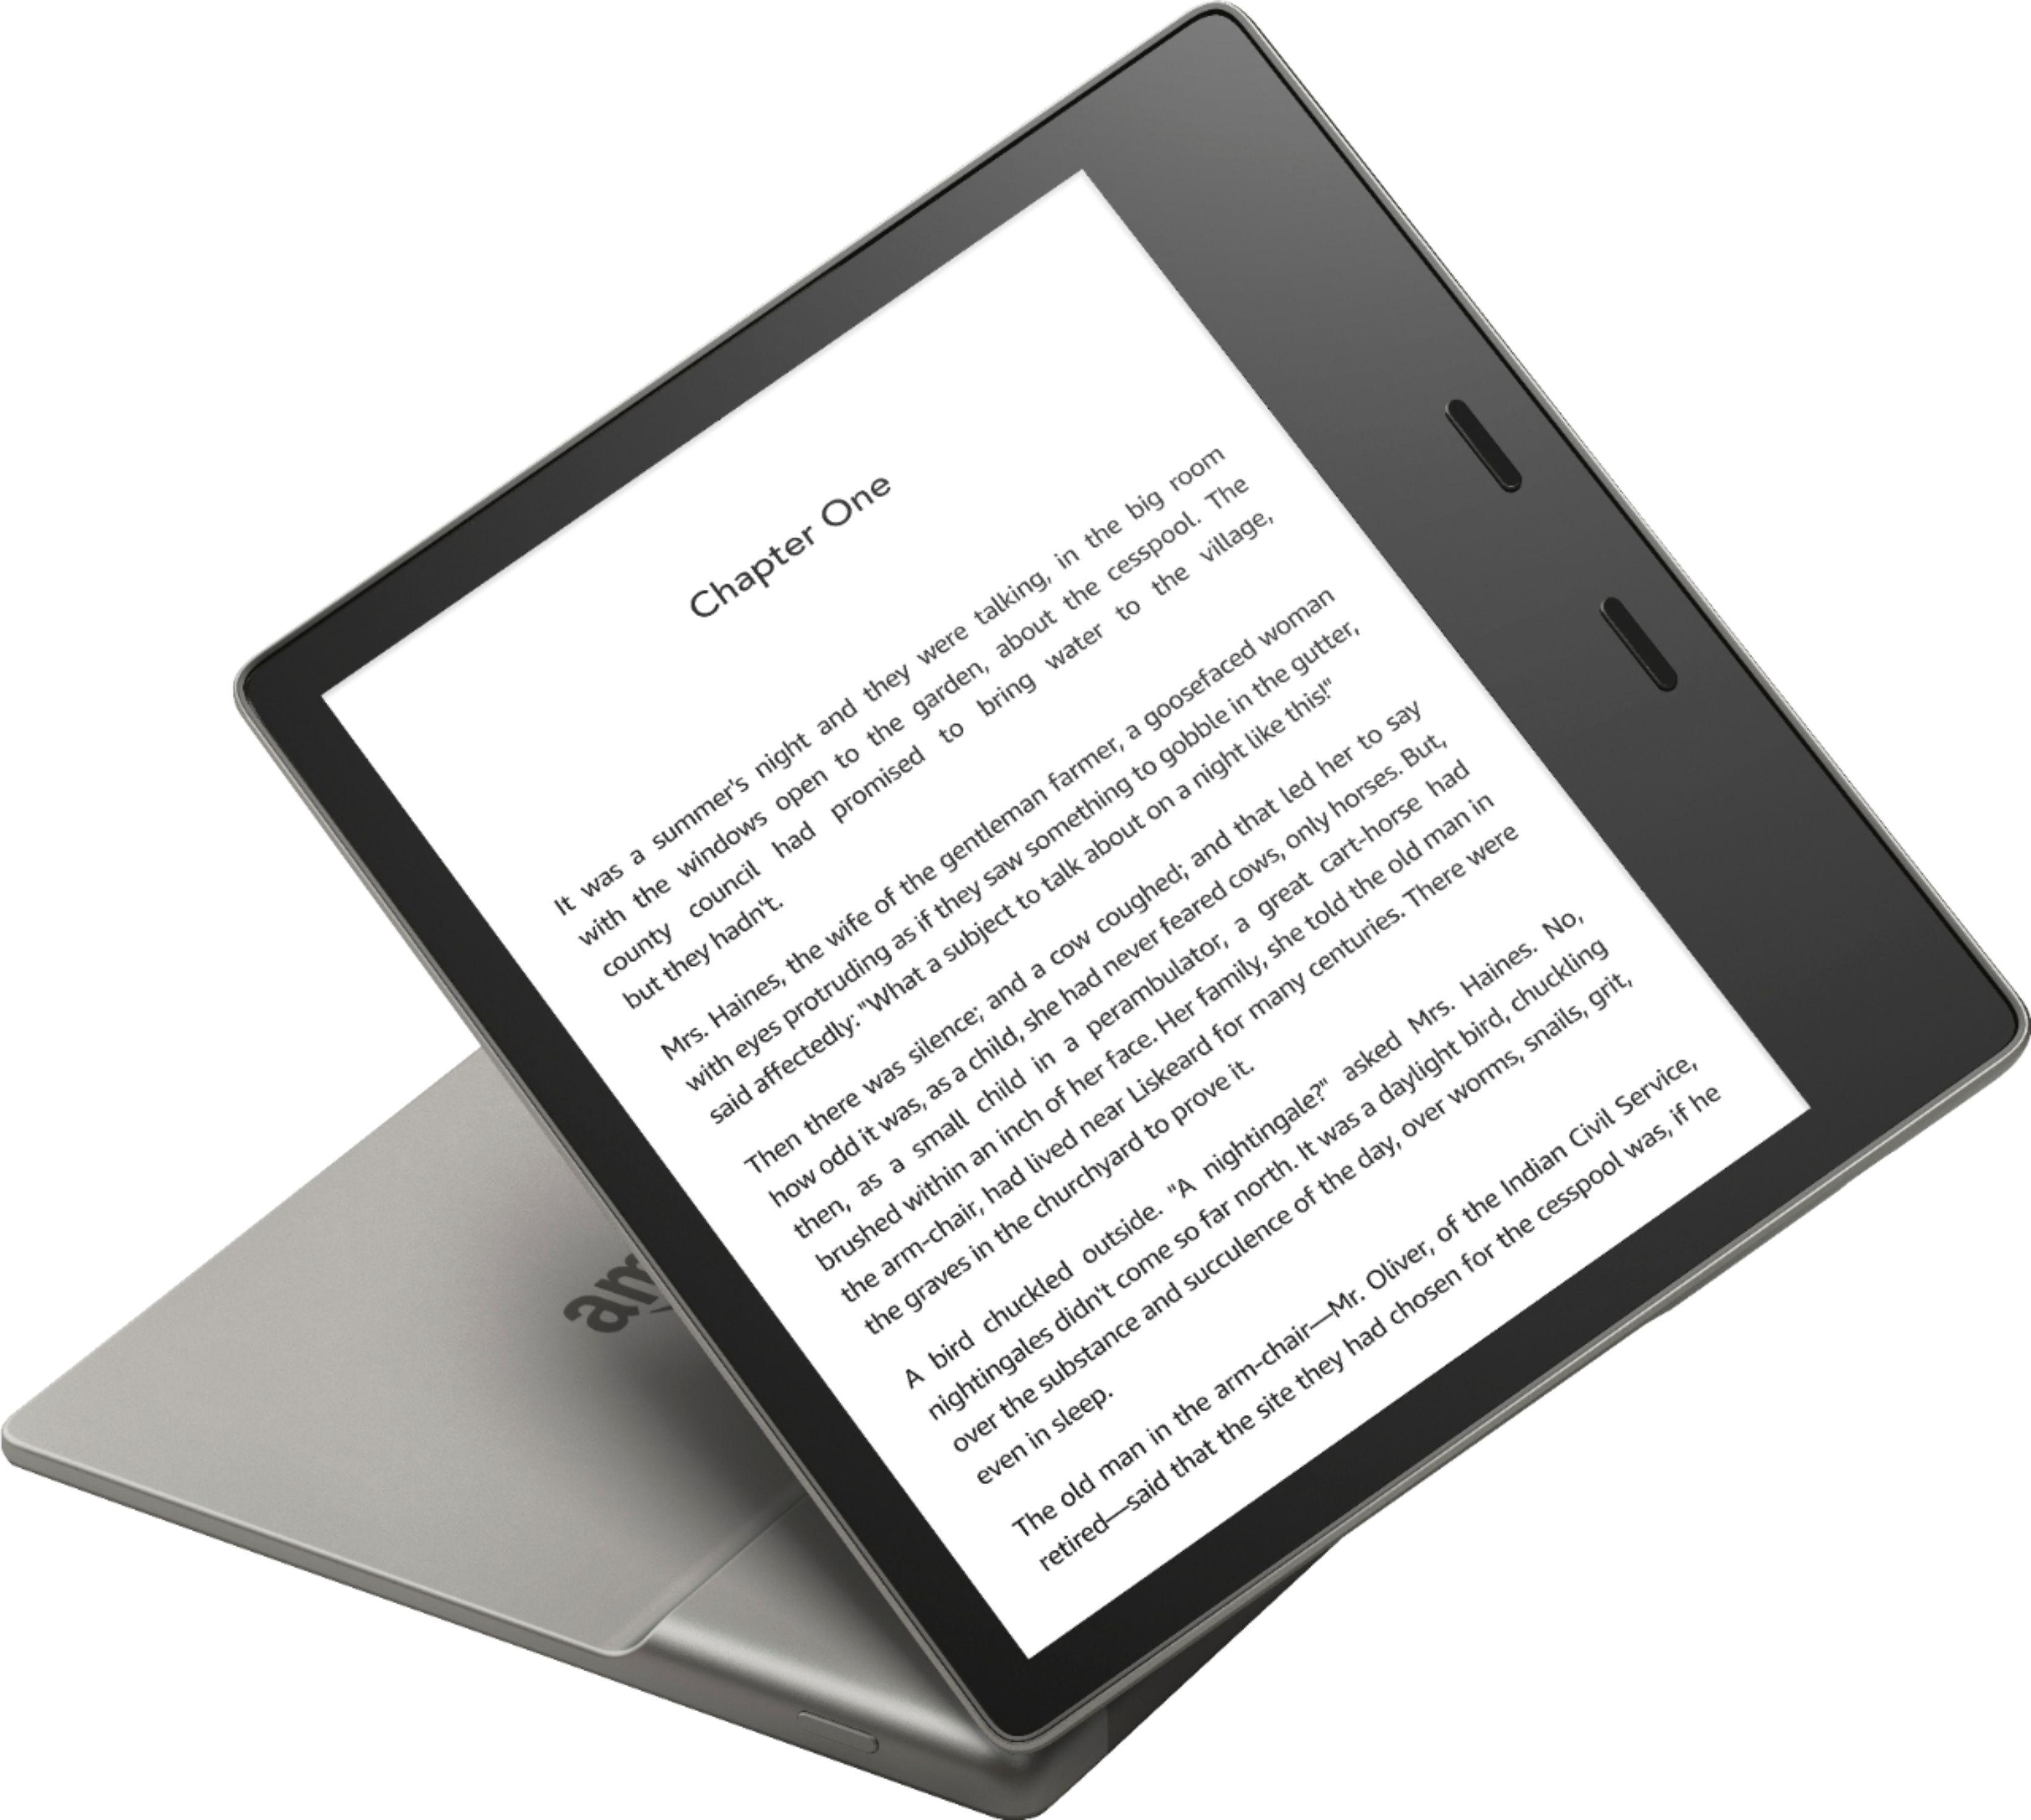 Kindle Oasis 7in Waterproof Wifi eBook E-Reader for $89.99 Shipped